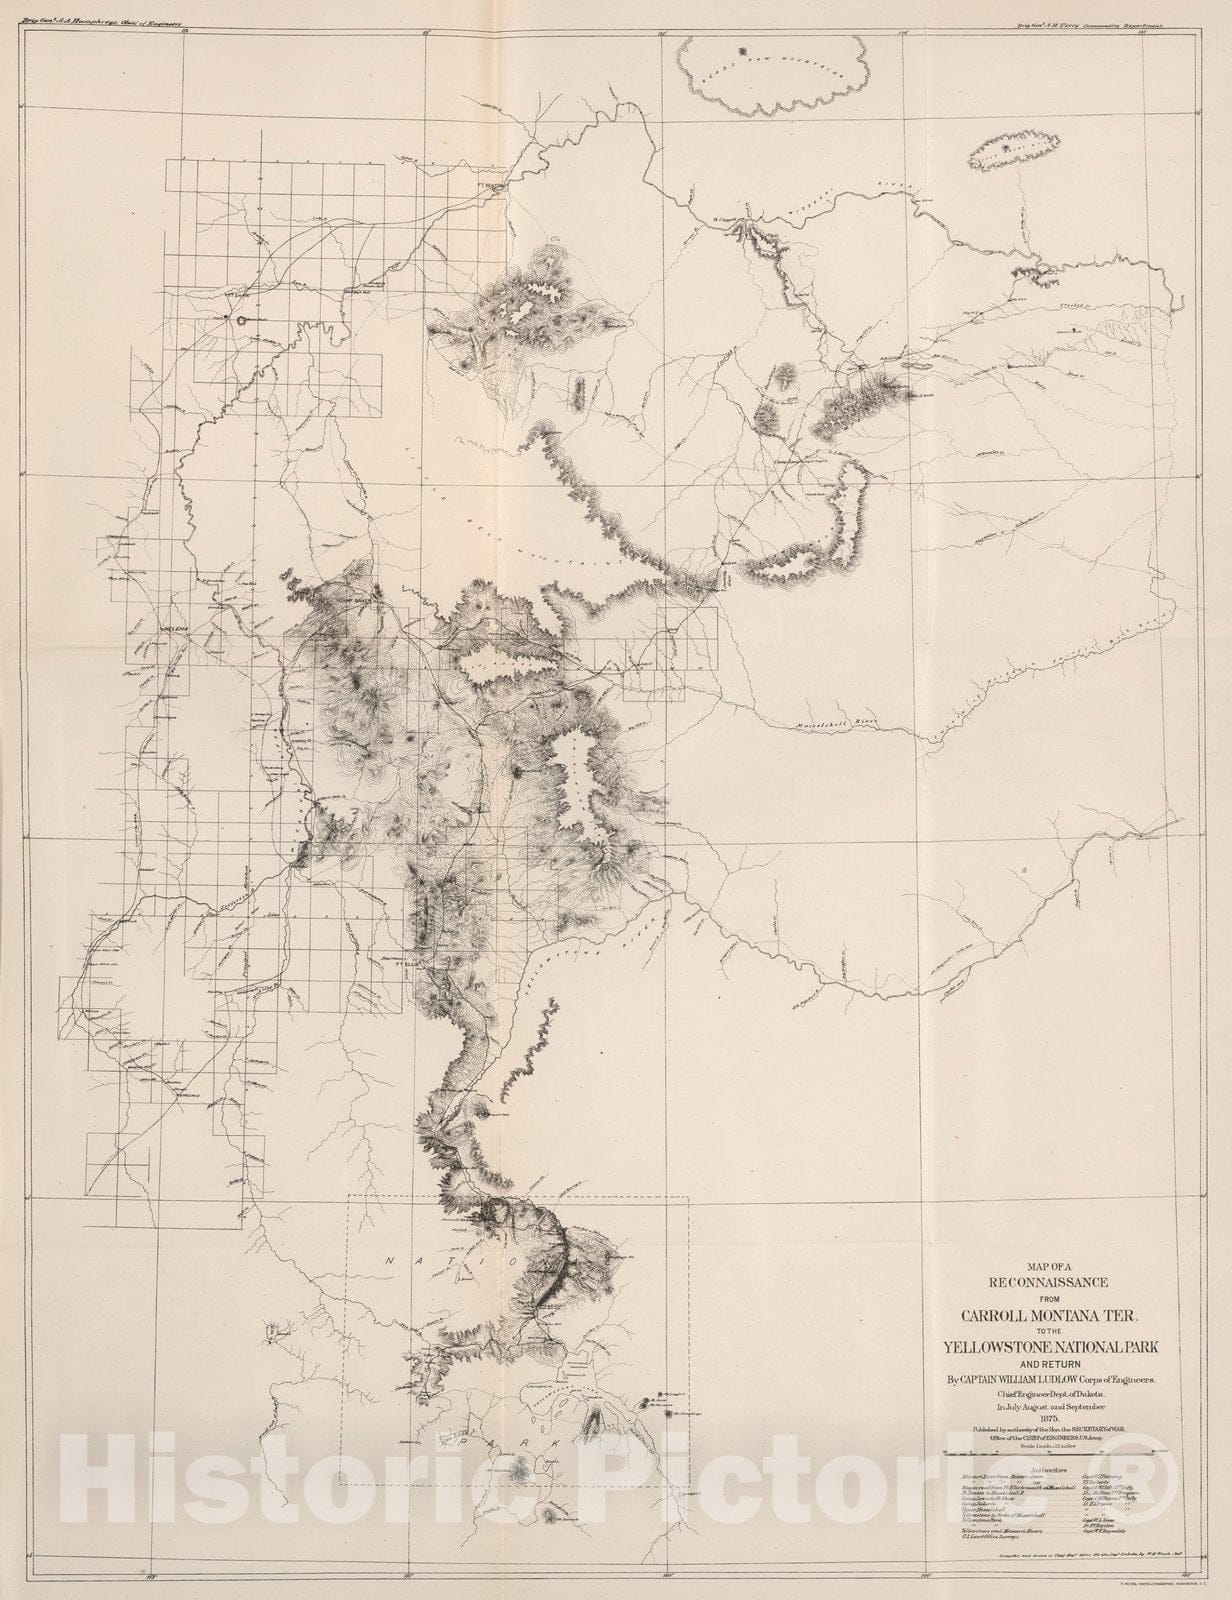 Historic Map : Map of a Reconnaissance From Carroll, Montana Ter. to the Yellowstone National Park, and Return, 1875 - Vintage Wall Art